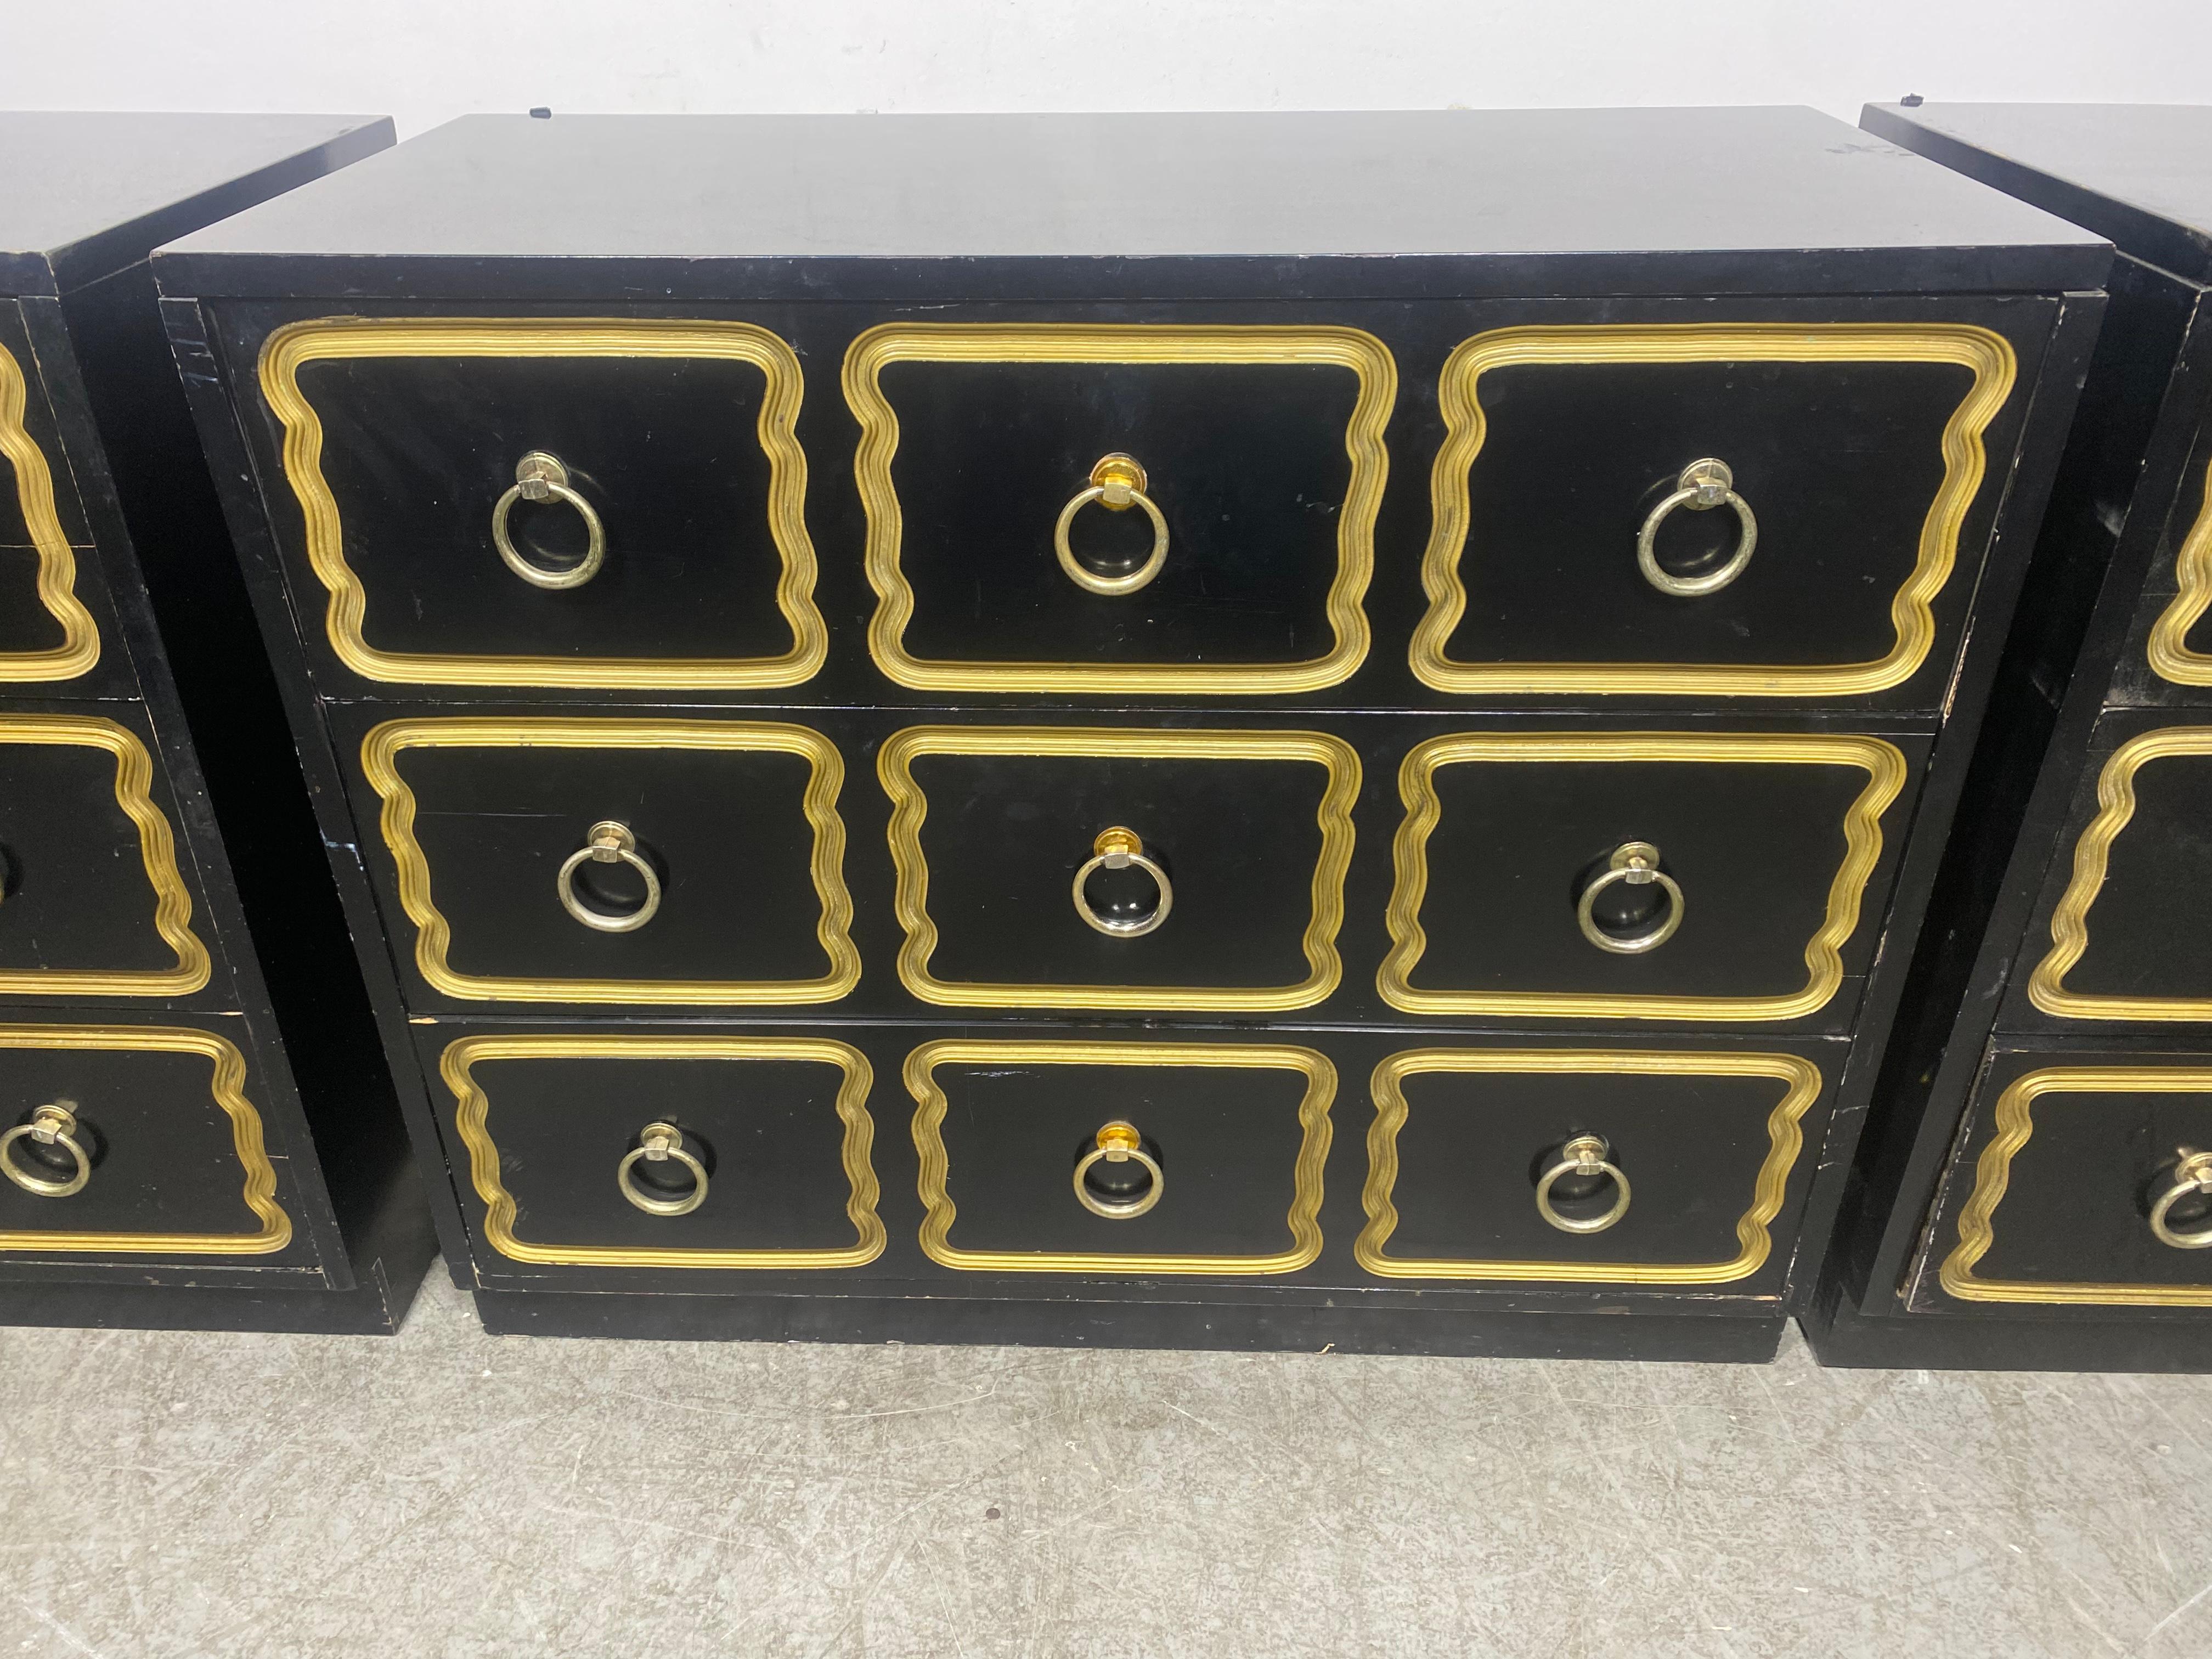 Set (3) Hollywood Regency Nightstands / Chests Dorothy Draper Espana Style .. Classic design.. Priced individually..better price for all.. Age appropriate wear,, minor scratches ,,paint loss.. Hand delivery avail to New York City or anywhere en